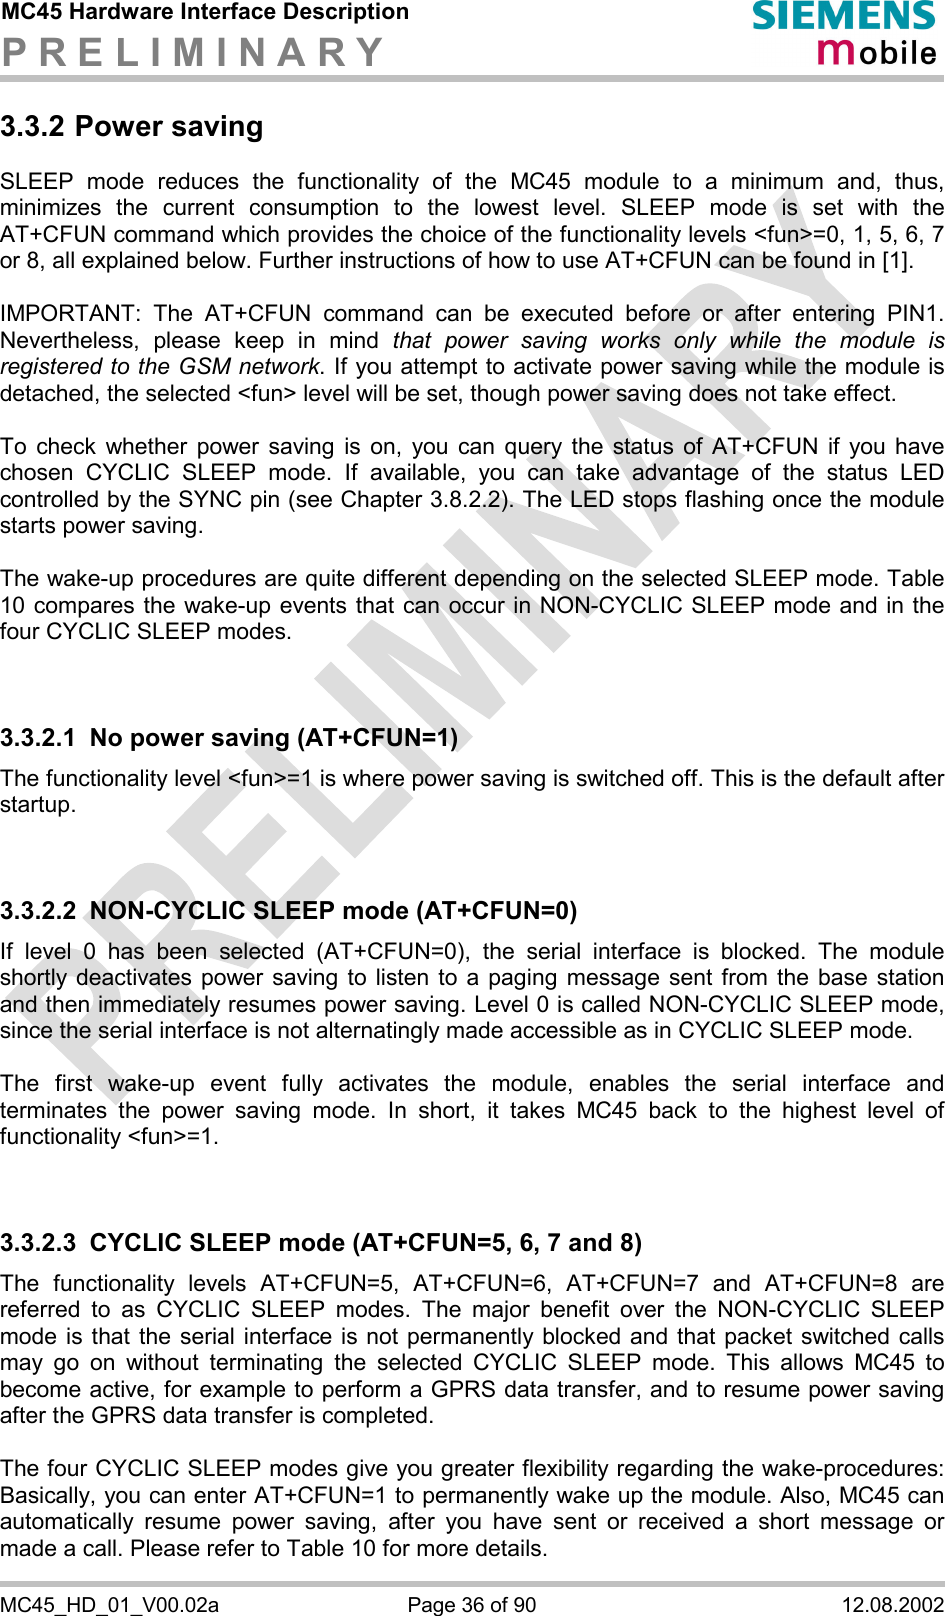 MC45 Hardware Interface Description P R E L I M I N A R Y      MC45_HD_01_V00.02a  Page 36 of 90  12.08.2002 3.3.2 Power saving SLEEP mode reduces the functionality of the MC45 module to a minimum and, thus, minimizes the current consumption to the lowest level. SLEEP mode is set with the AT+CFUN command which provides the choice of the functionality levels &lt;fun&gt;=0, 1, 5, 6, 7 or 8, all explained below. Further instructions of how to use AT+CFUN can be found in [1].  IMPORTANT: The AT+CFUN command can be executed before or after entering PIN1. Nevertheless, please keep in mind that power saving works only while the module is registered to the GSM network. If you attempt to activate power saving while the module is detached, the selected &lt;fun&gt; level will be set, though power saving does not take effect.  To check whether power saving is on, you can query the status of AT+CFUN if you have chosen CYCLIC SLEEP mode. If available, you can take advantage of the status LED controlled by the SYNC pin (see Chapter 3.8.2.2). The LED stops flashing once the module starts power saving.  The wake-up procedures are quite different depending on the selected SLEEP mode. Table 10 compares the wake-up events that can occur in NON-CYCLIC SLEEP mode and in the four CYCLIC SLEEP modes.   3.3.2.1  No power saving (AT+CFUN=1) The functionality level &lt;fun&gt;=1 is where power saving is switched off. This is the default after startup.    3.3.2.2  NON-CYCLIC SLEEP mode (AT+CFUN=0) If level 0 has been selected (AT+CFUN=0), the serial interface is blocked. The module shortly deactivates power saving to listen to a paging message sent from the base station and then immediately resumes power saving. Level 0 is called NON-CYCLIC SLEEP mode, since the serial interface is not alternatingly made accessible as in CYCLIC SLEEP mode.  The first wake-up event fully activates the module, enables the serial interface and terminates the power saving mode. In short, it takes MC45 back to the highest level of functionality &lt;fun&gt;=1.   3.3.2.3  CYCLIC SLEEP mode (AT+CFUN=5, 6, 7 and 8) The functionality levels AT+CFUN=5, AT+CFUN=6, AT+CFUN=7 and AT+CFUN=8 are referred to as CYCLIC SLEEP modes. The major benefit over the NON-CYCLIC SLEEP mode is that the serial interface is not permanently blocked and that packet switched calls may go on without terminating the selected CYCLIC SLEEP mode. This allows MC45 to become active, for example to perform a GPRS data transfer, and to resume power saving after the GPRS data transfer is completed.  The four CYCLIC SLEEP modes give you greater flexibility regarding the wake-procedures: Basically, you can enter AT+CFUN=1 to permanently wake up the module. Also, MC45 can automatically resume power saving, after you have sent or received a short message or made a call. Please refer to Table 10 for more details. 